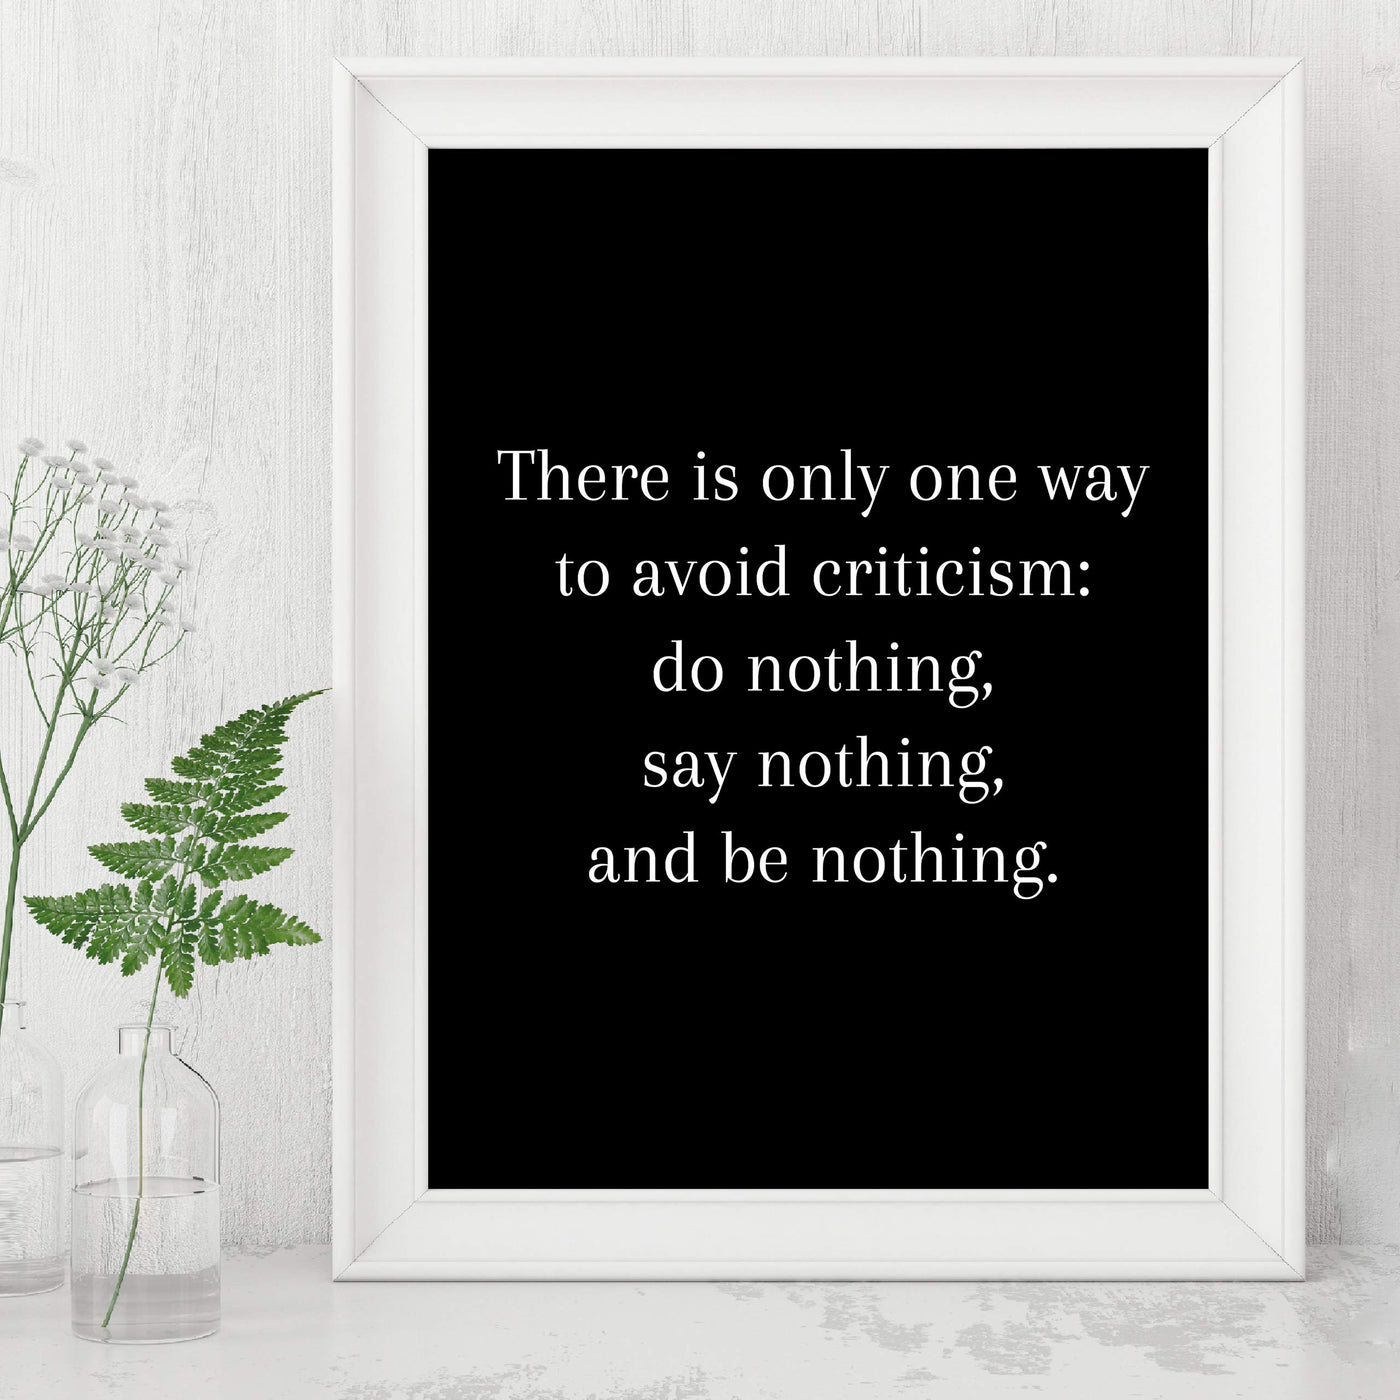 One Way To Avoid Criticism: Do-Say-Be Nothing Inspirational Wall Quotes -8x10" Motivational Art Print-Ready to Frame. Modern Typographic Poster Print. Home-Office-Classroom-Gym Decor. Great Advice!